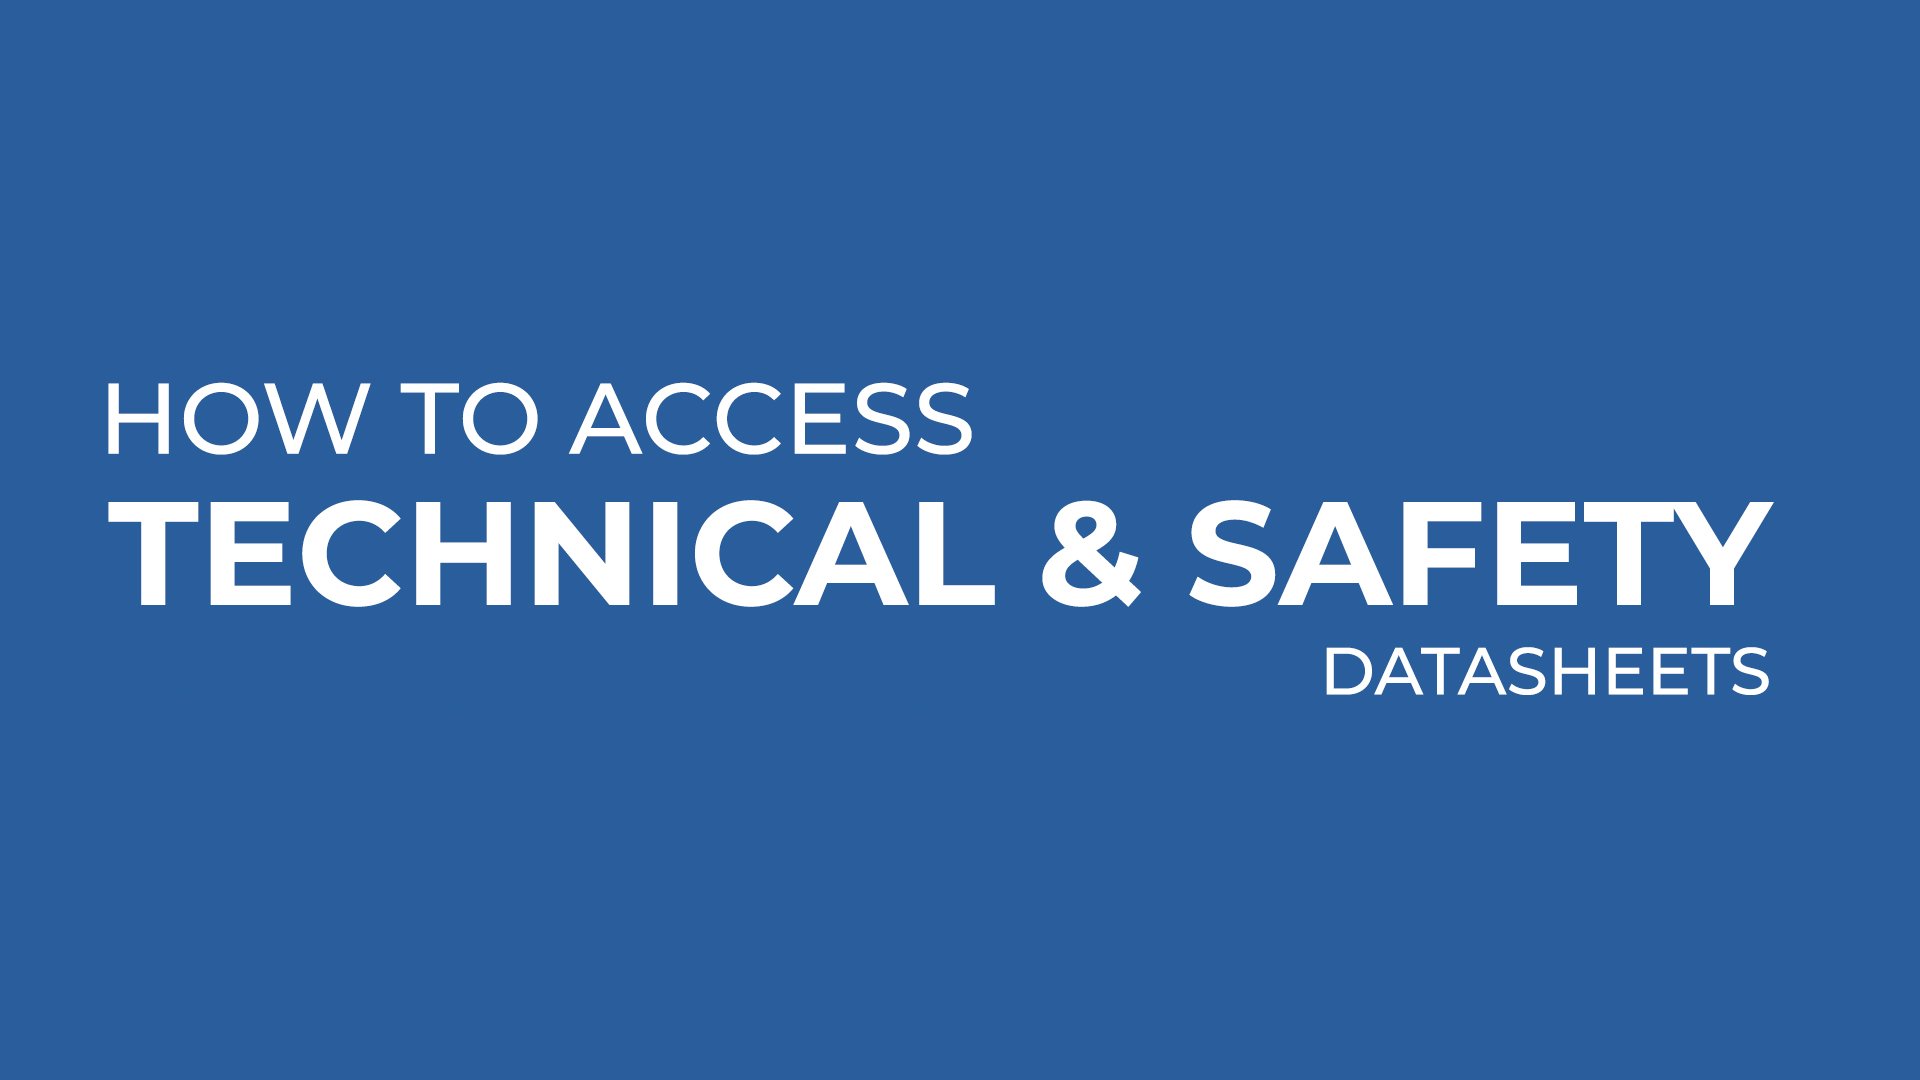 How to access datasheets